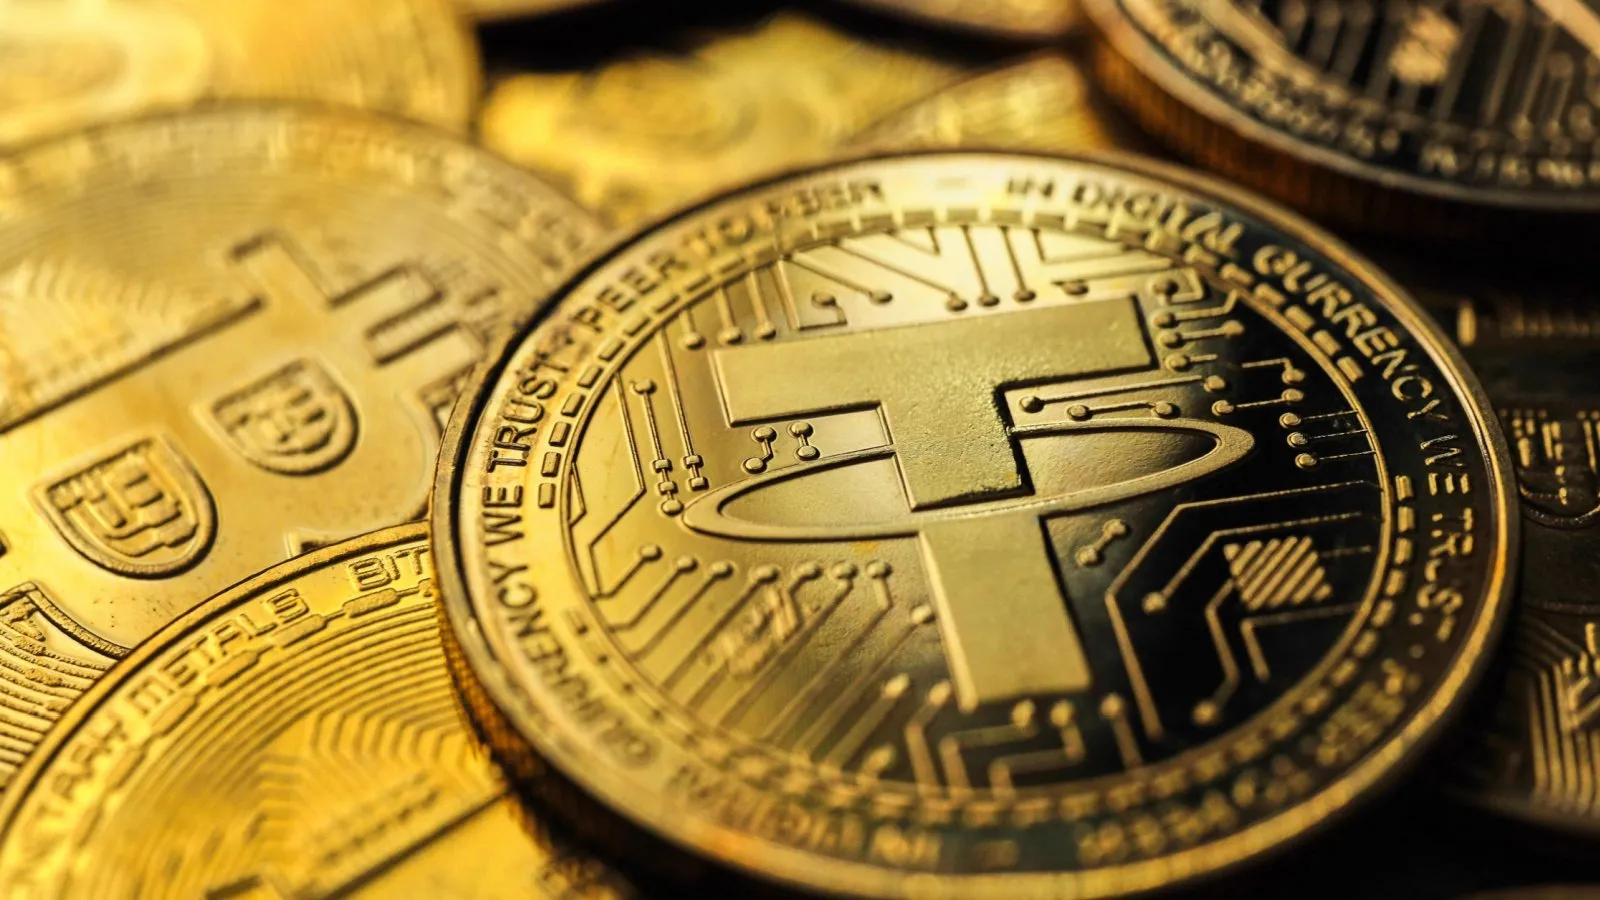 Tether is the biggest stablecoin in crypto by market cap. Image: Shutterstock